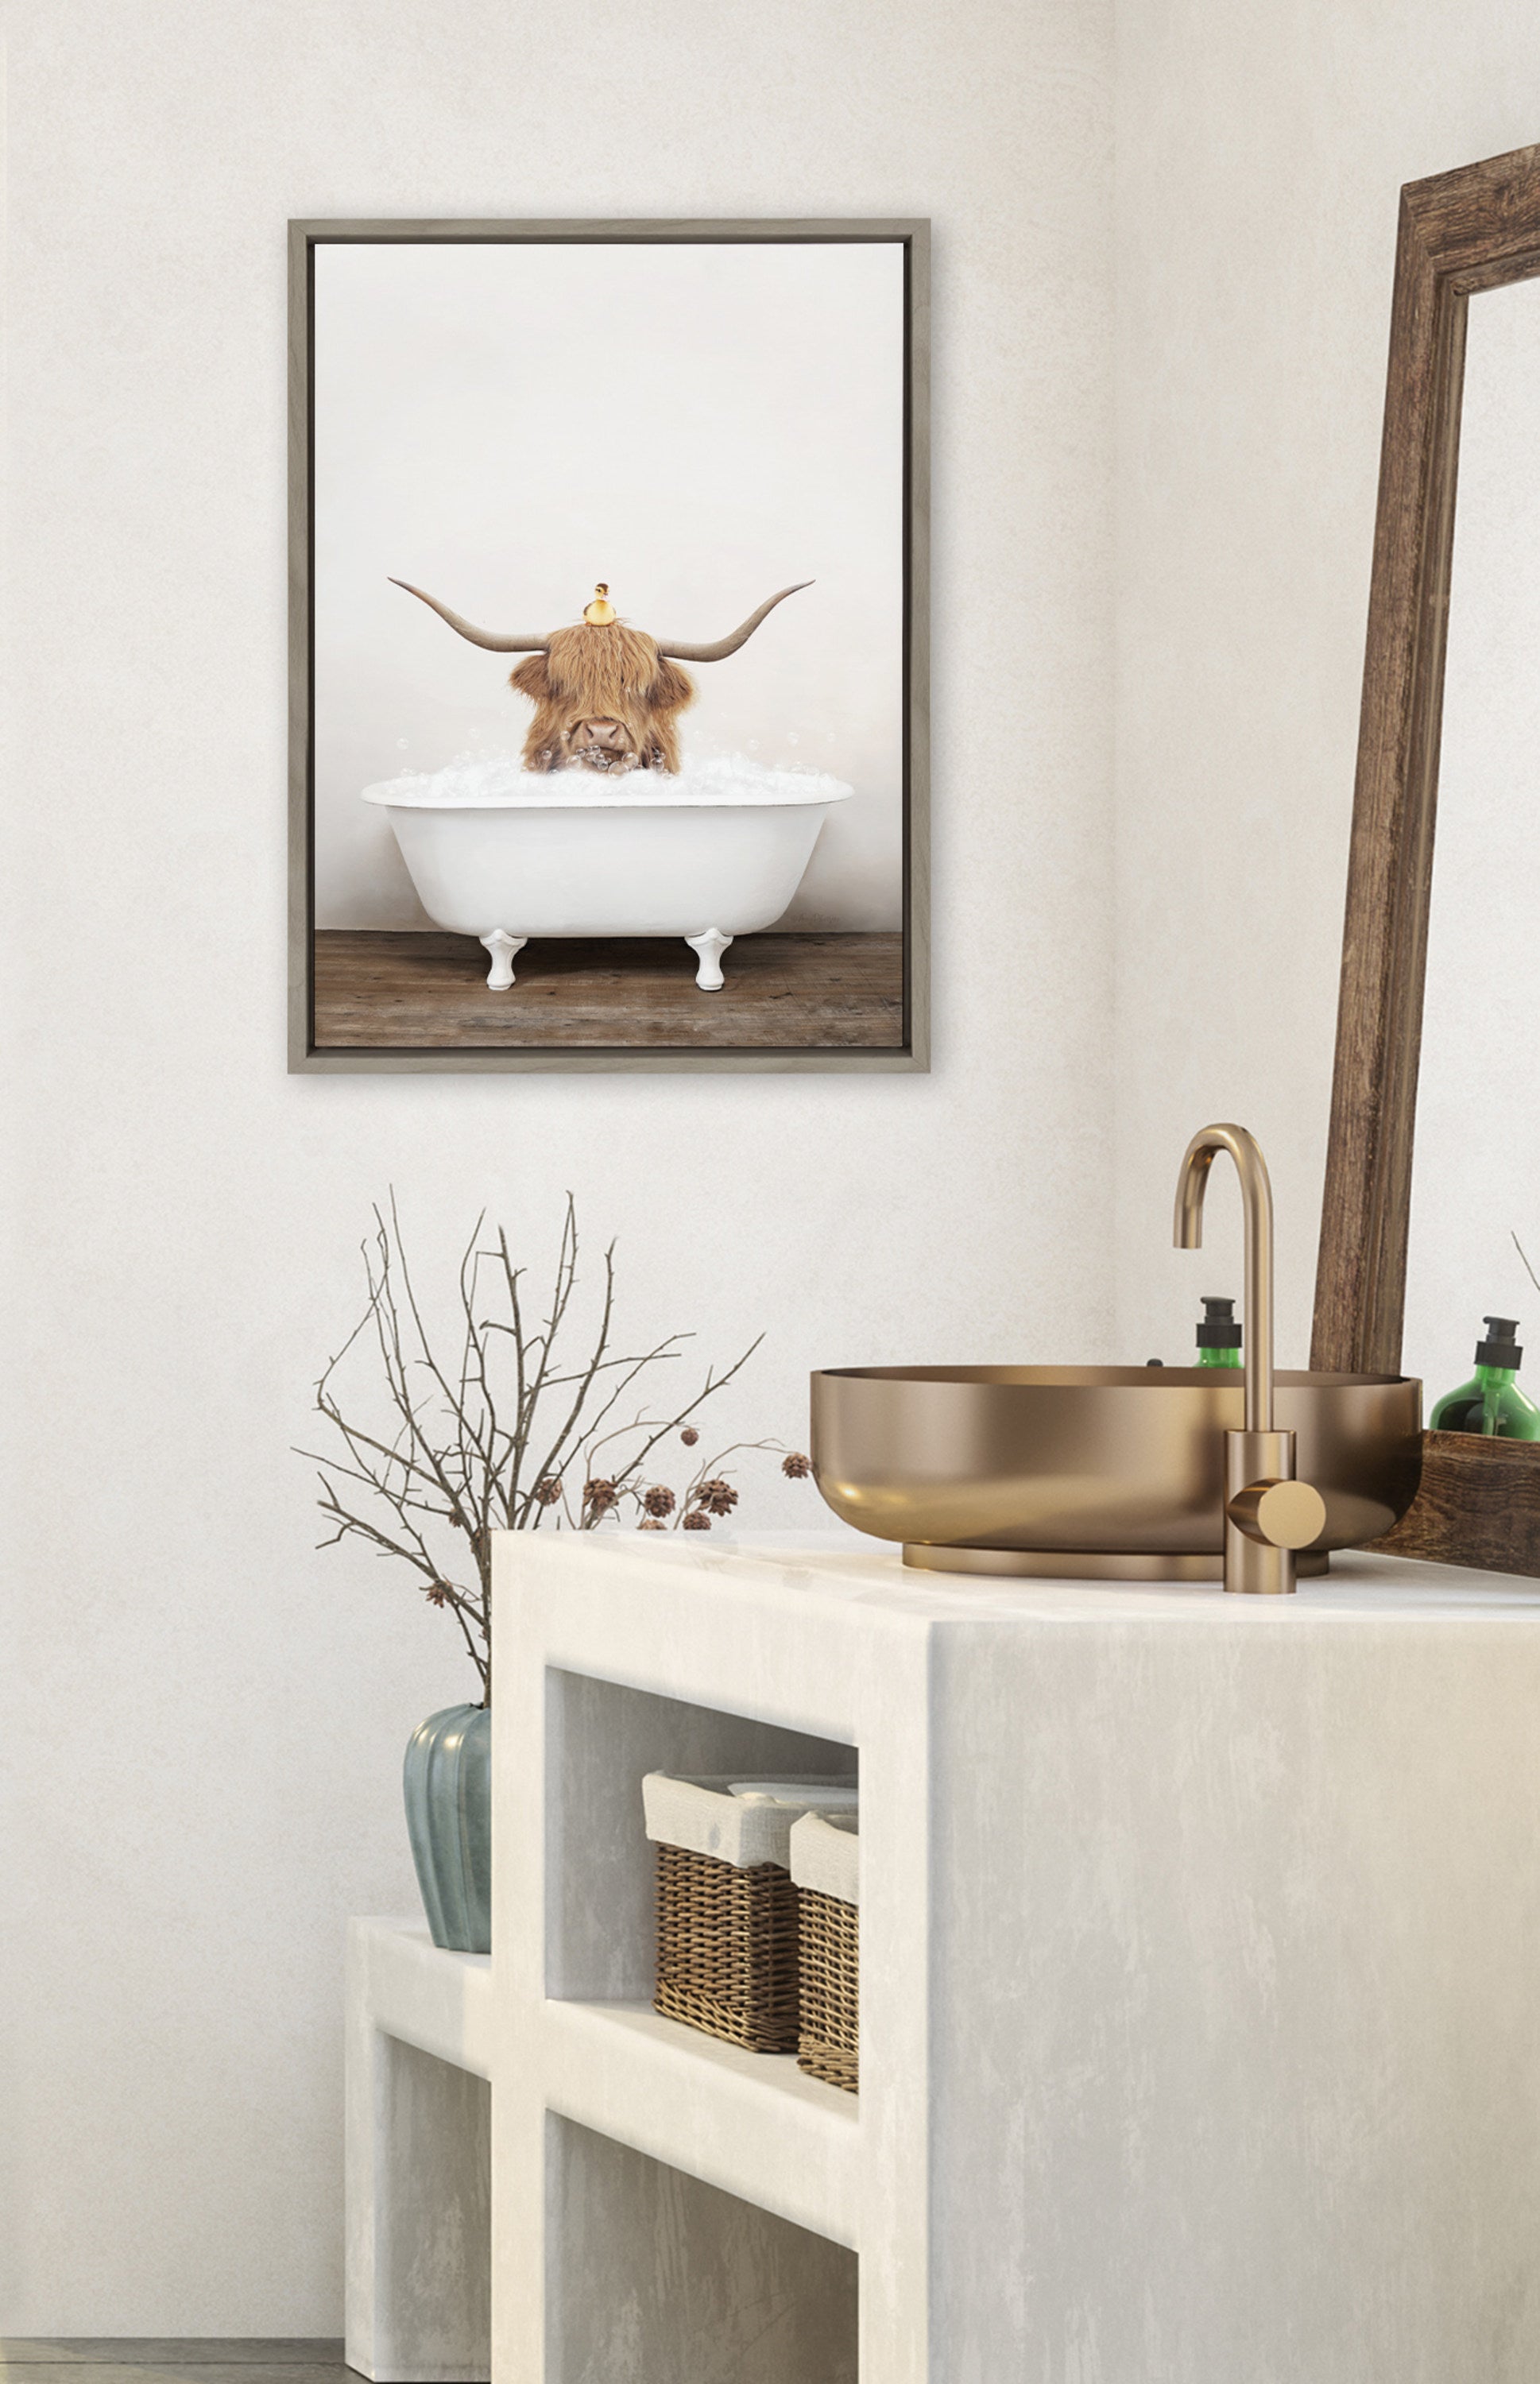 Sylvie Highland Cow and Duckling in Rustic Bath Framed Canvas by Amy Peterson Art Studio